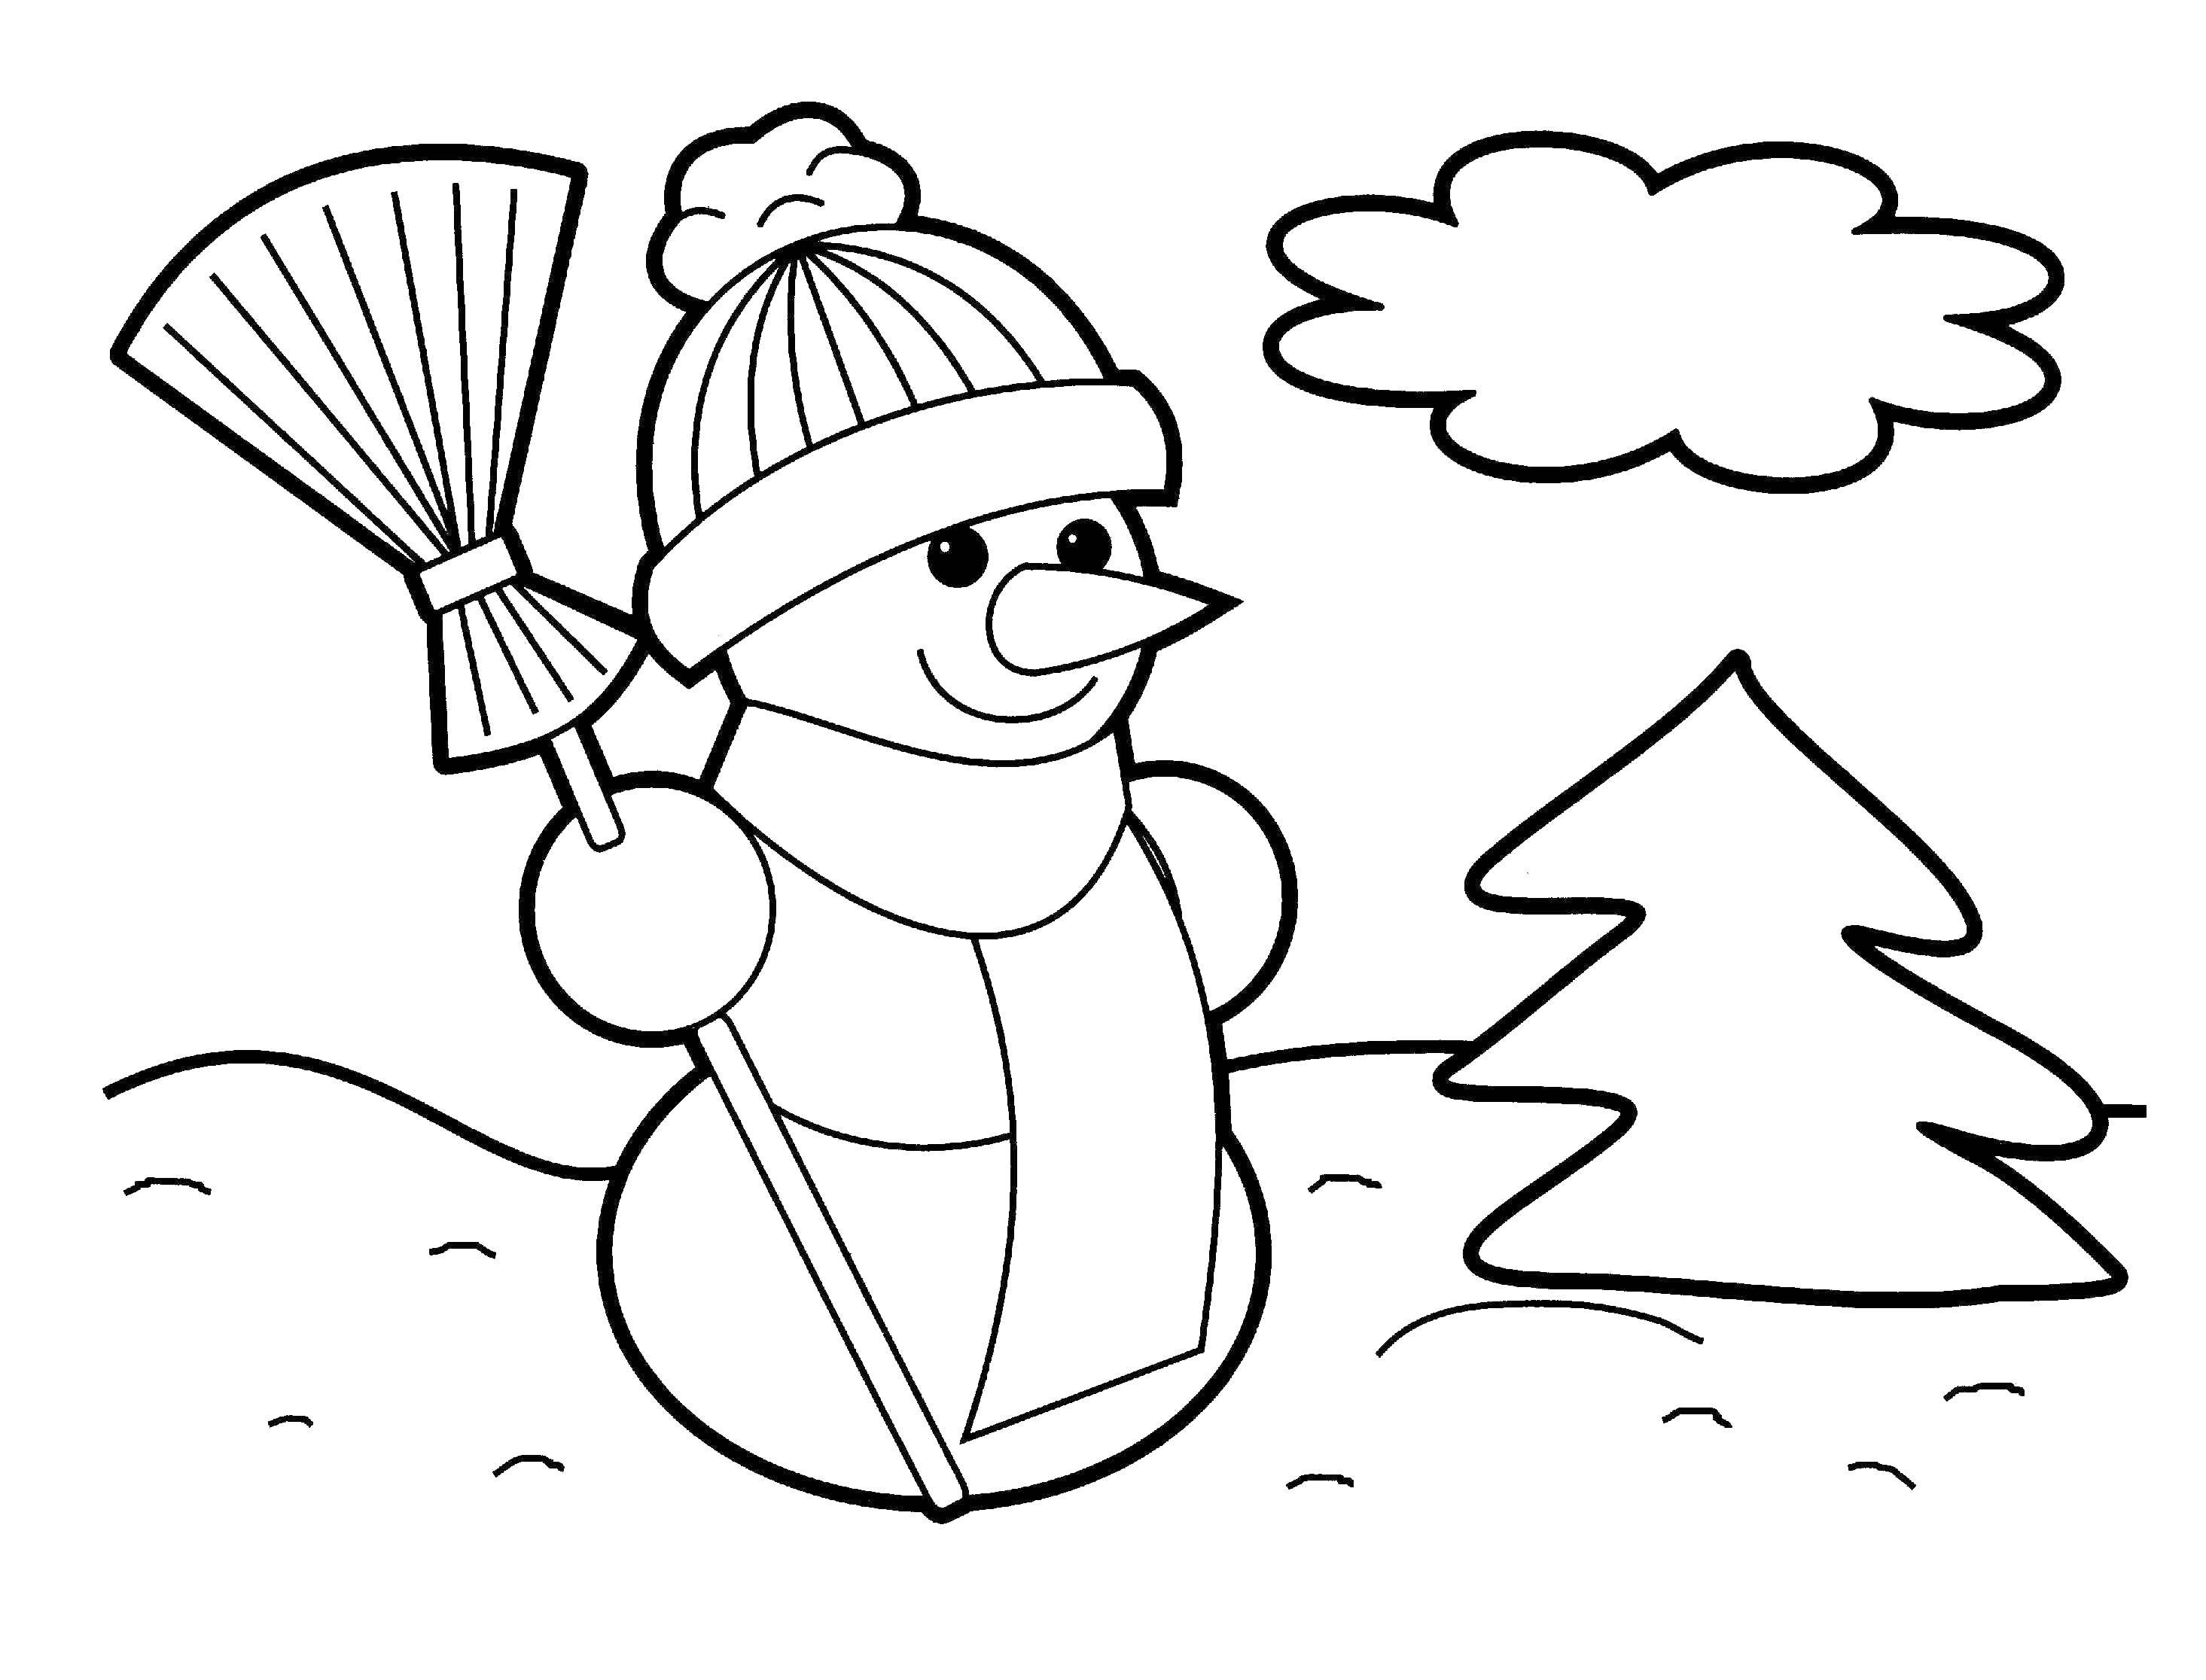 Coloring Snowman with broom. Category snow. Tags:  snow, snowman, winter.